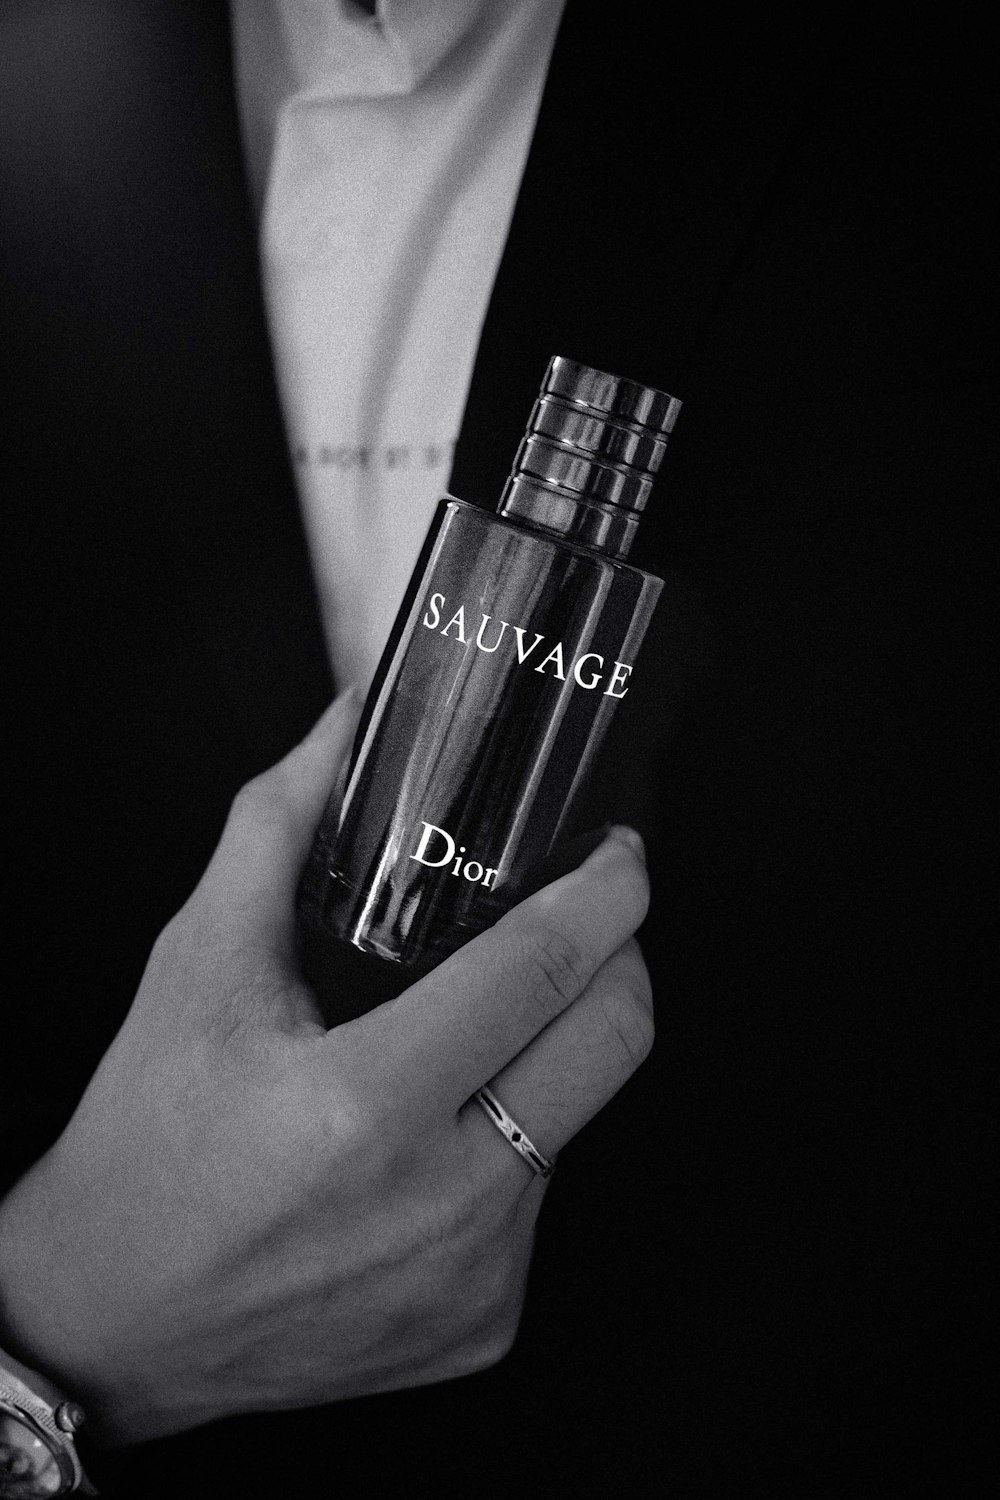 a man in a suit holding a bottle of perfume